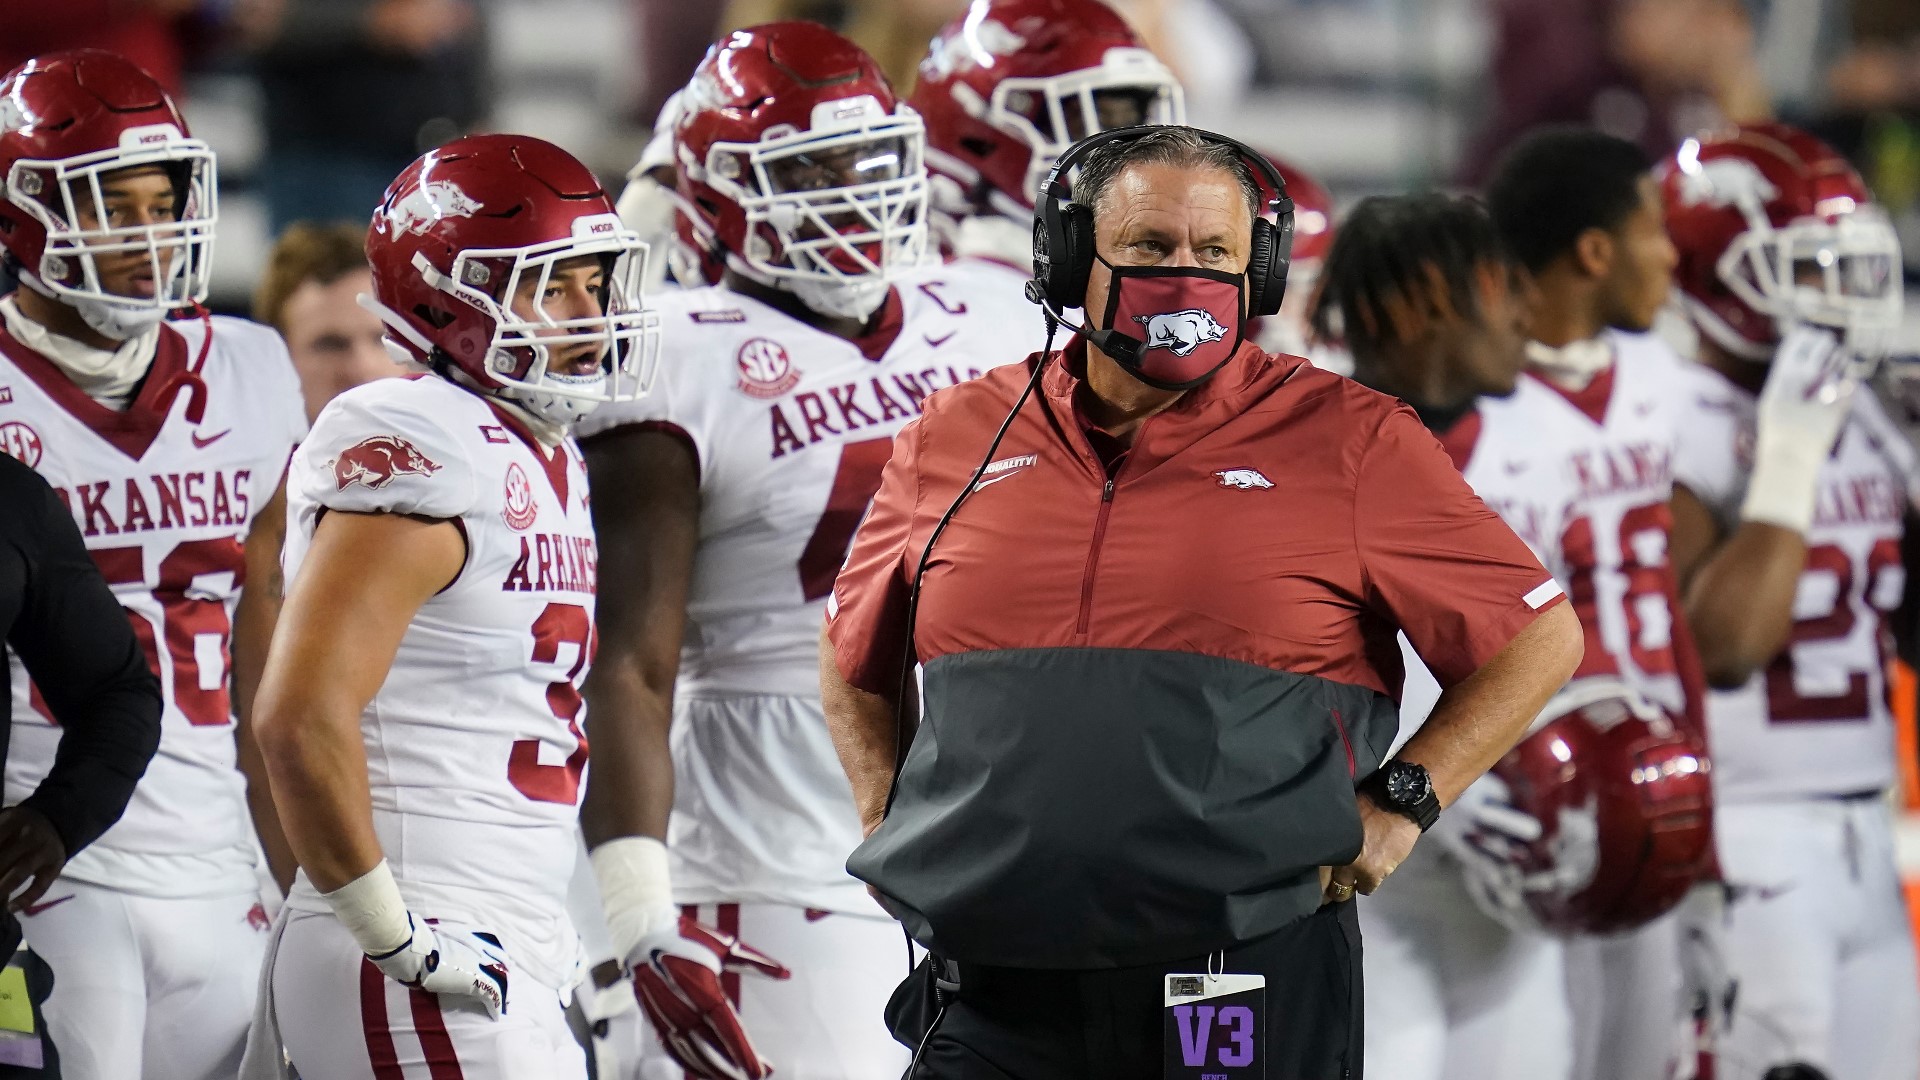 For the first time since 2016 the Arkansas Razorbacks are going bowling, being selected to play TCU in the Mercari Texas Bowl in Houston, Texas on Dec. 31